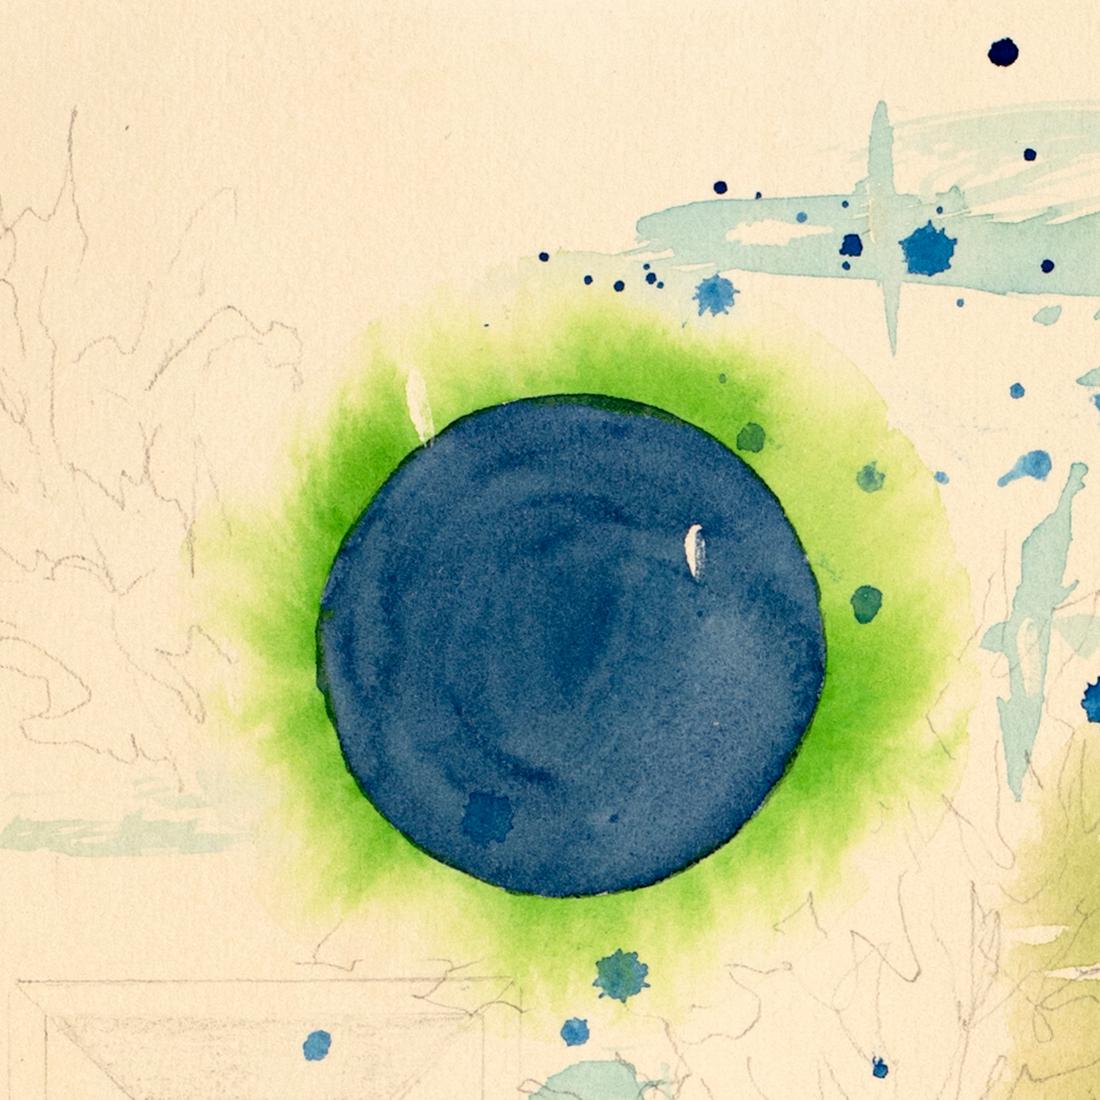 Green Universe by Lori Fox. Green and blue hues watercolor and graphite on paper im Angebot 1